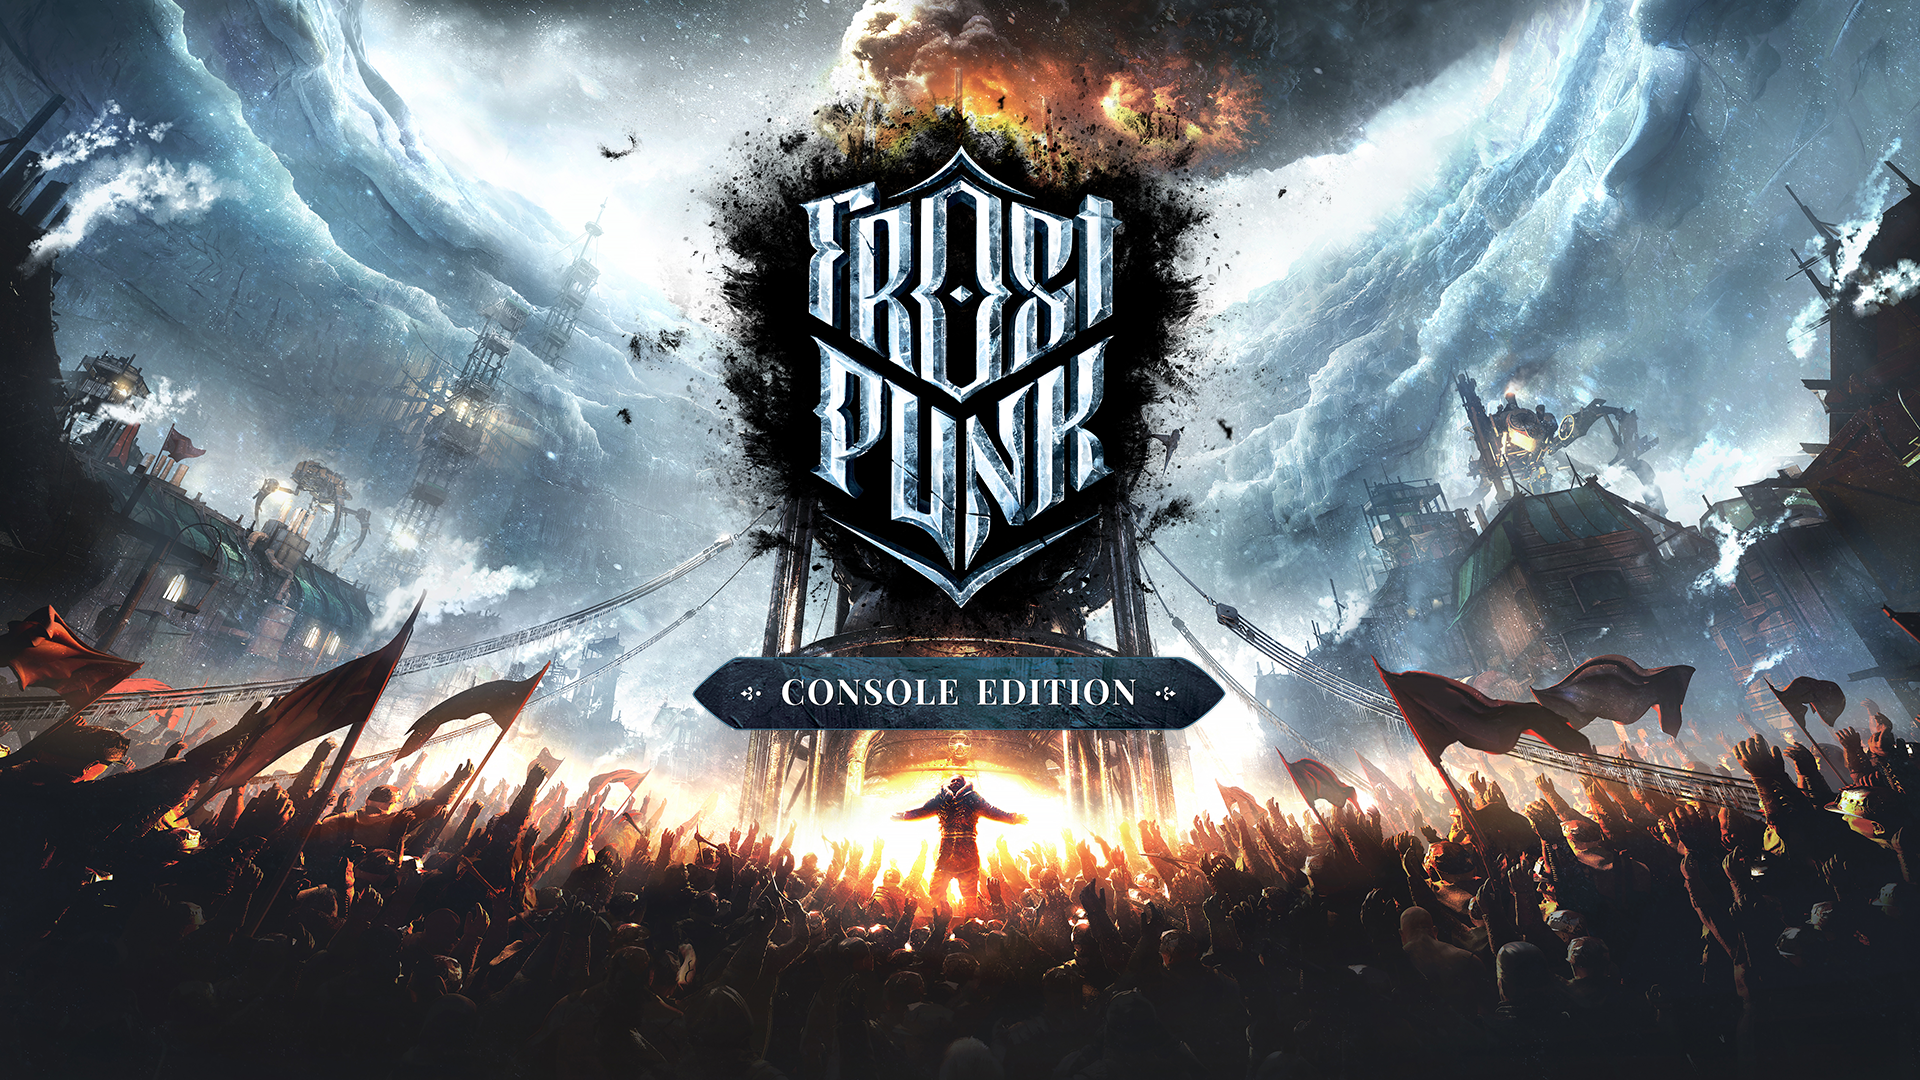 Image for Frostpunk coming to PS4, Xbox One this summer, will be "balanced" for consoles